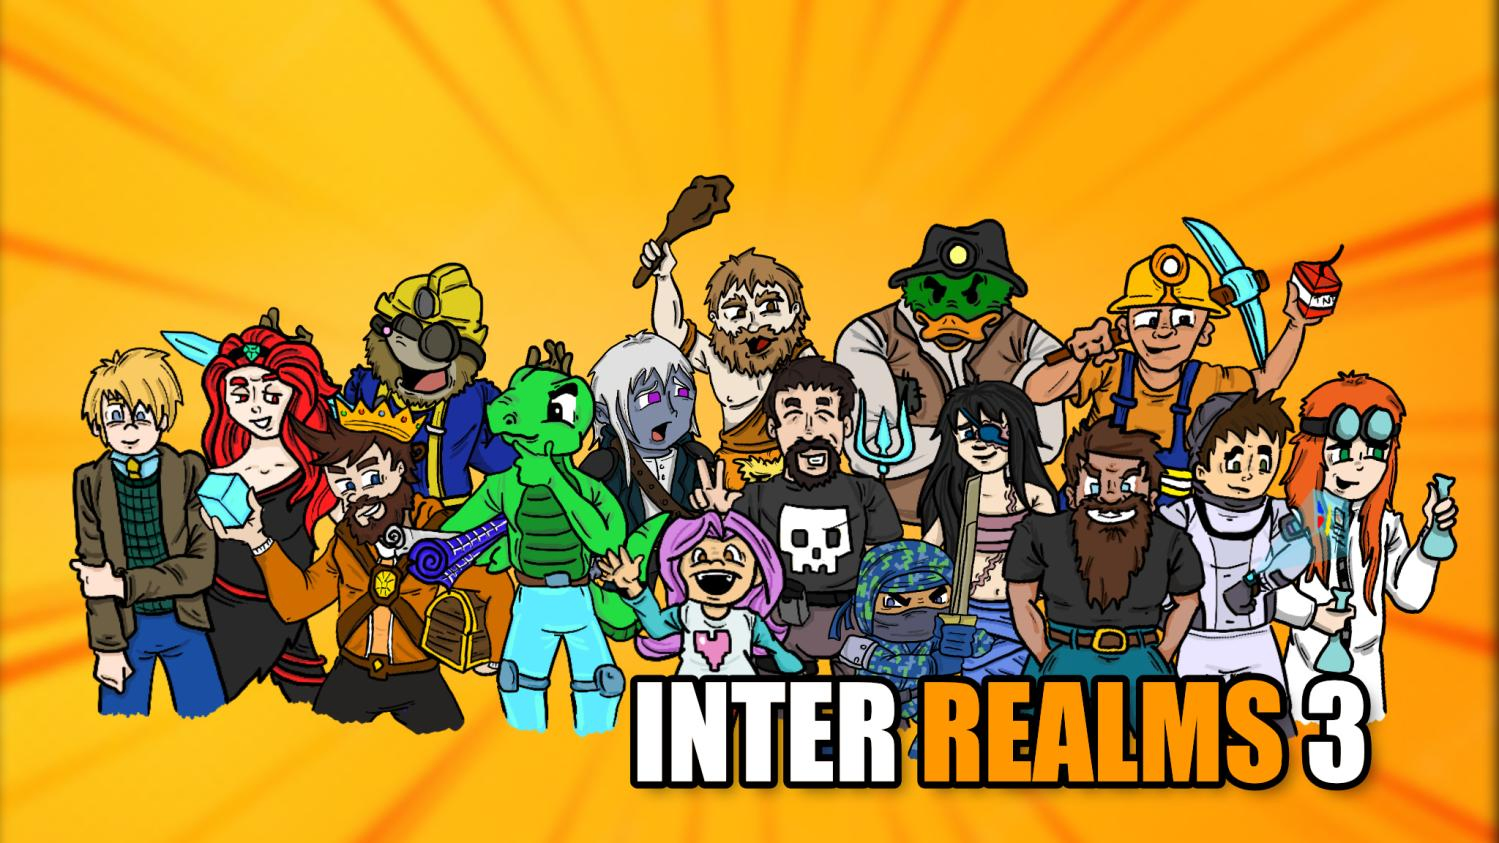 Inter Realms content creators drawn by Blind Kubsy!